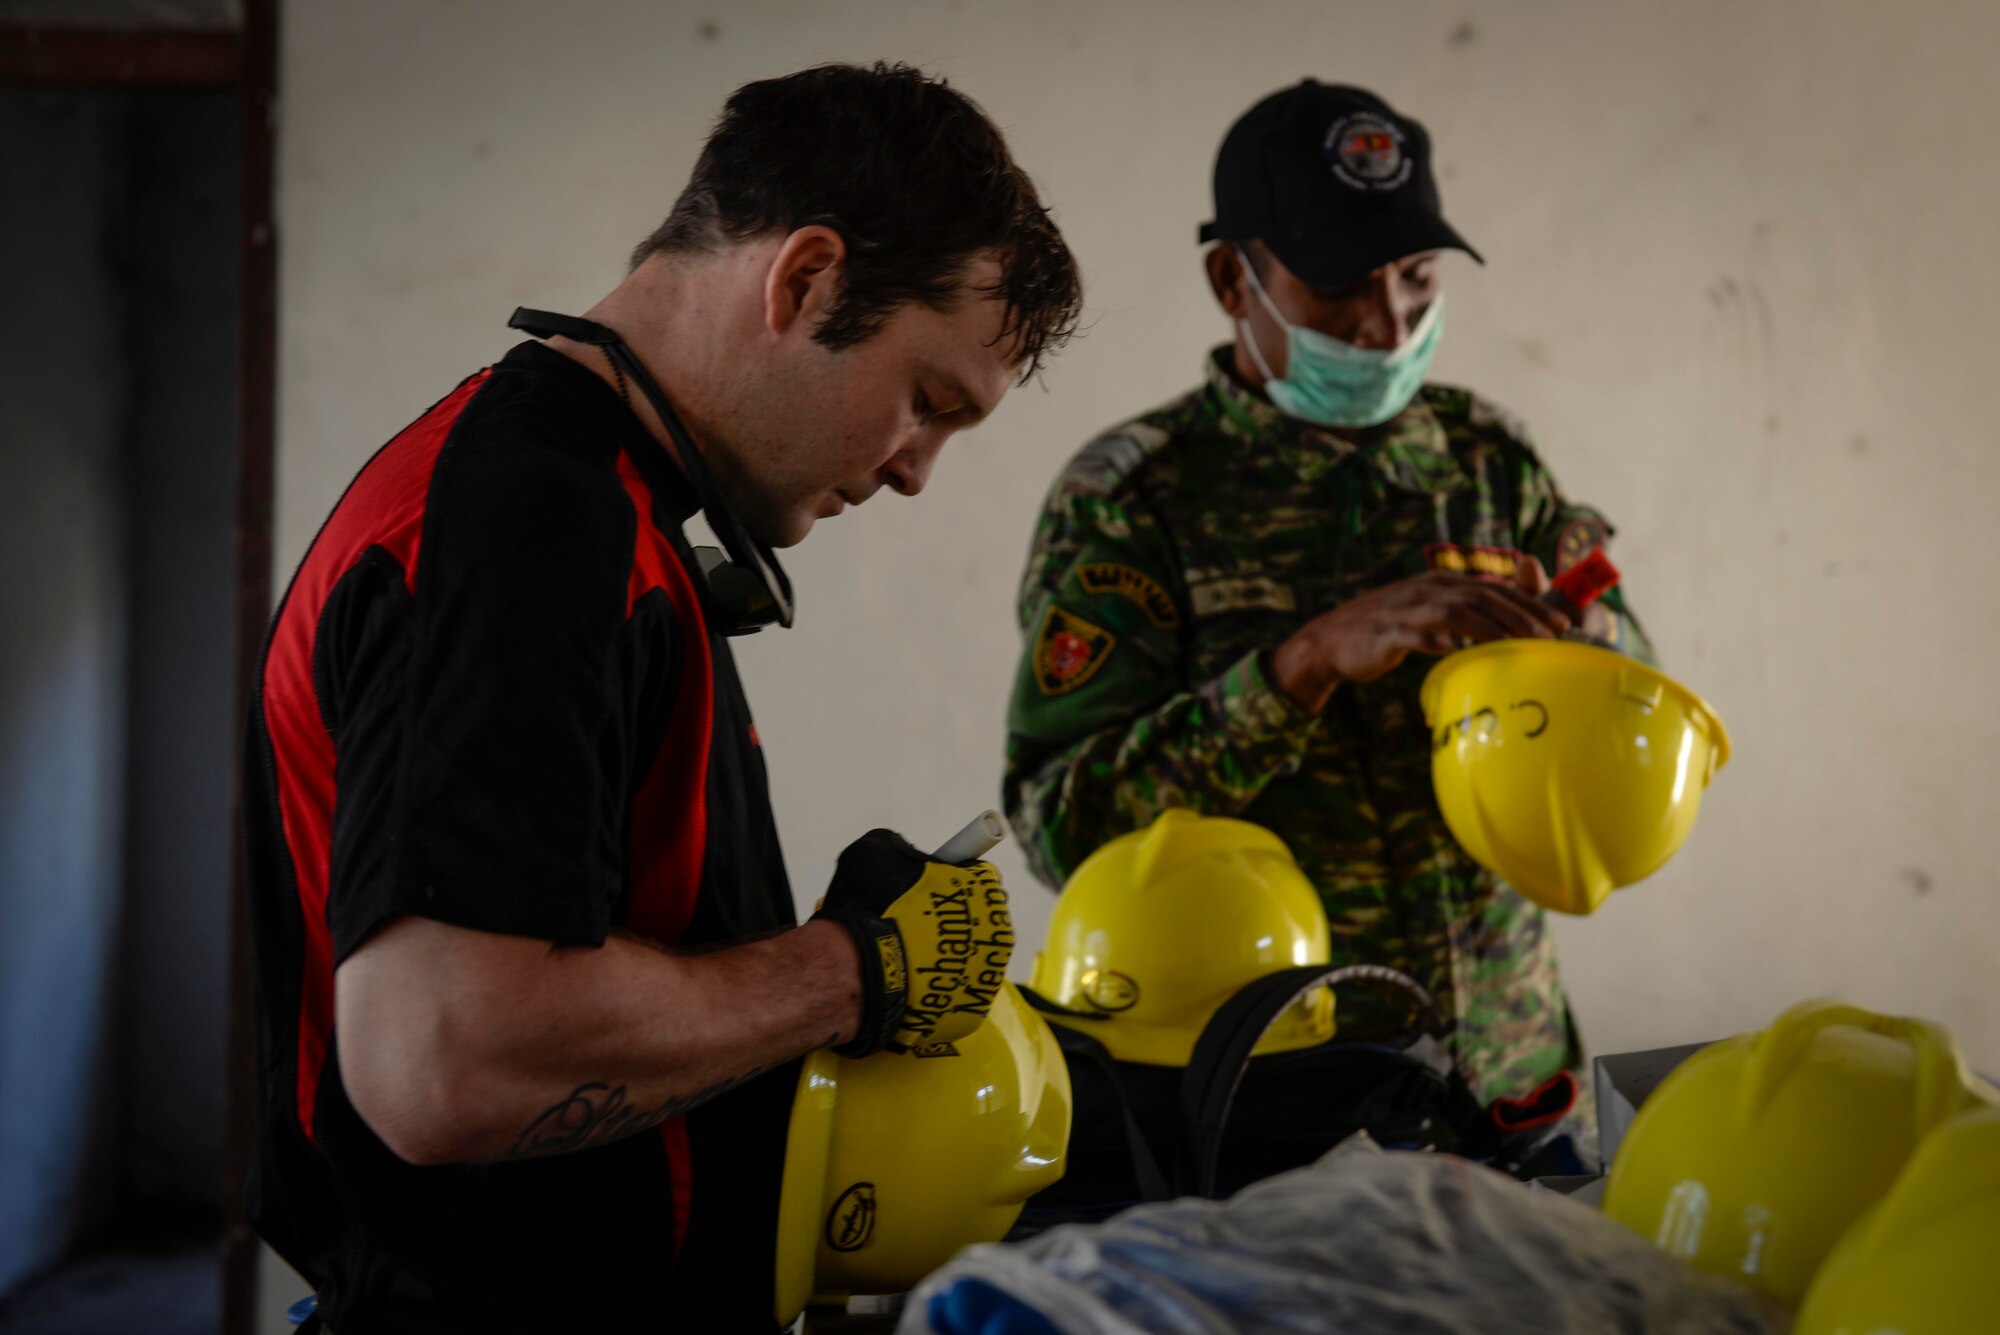 Sapper Reece Stairmand, a Pacific Angel 15-2 carpenter from New Zealand, and a member of the Falintil Forças de Defesa de Timor-Leste, write their names on protective helmets before beginning work on a Pacific Angel 15-2 construction project Sept. 5, 2015, in Baucau, Timor-Leste. Efforts undertaken during Pacific Angel help multilateral militaries in the Pacific improve and build relationships across a wide spectrum of civic operations, which bolsters each nation’s capacity to respond and support future humanitarian assistance and disaster relief operations. (U.S. Air Force photo by Staff Sgt. Alexander W. Riedel/Released)